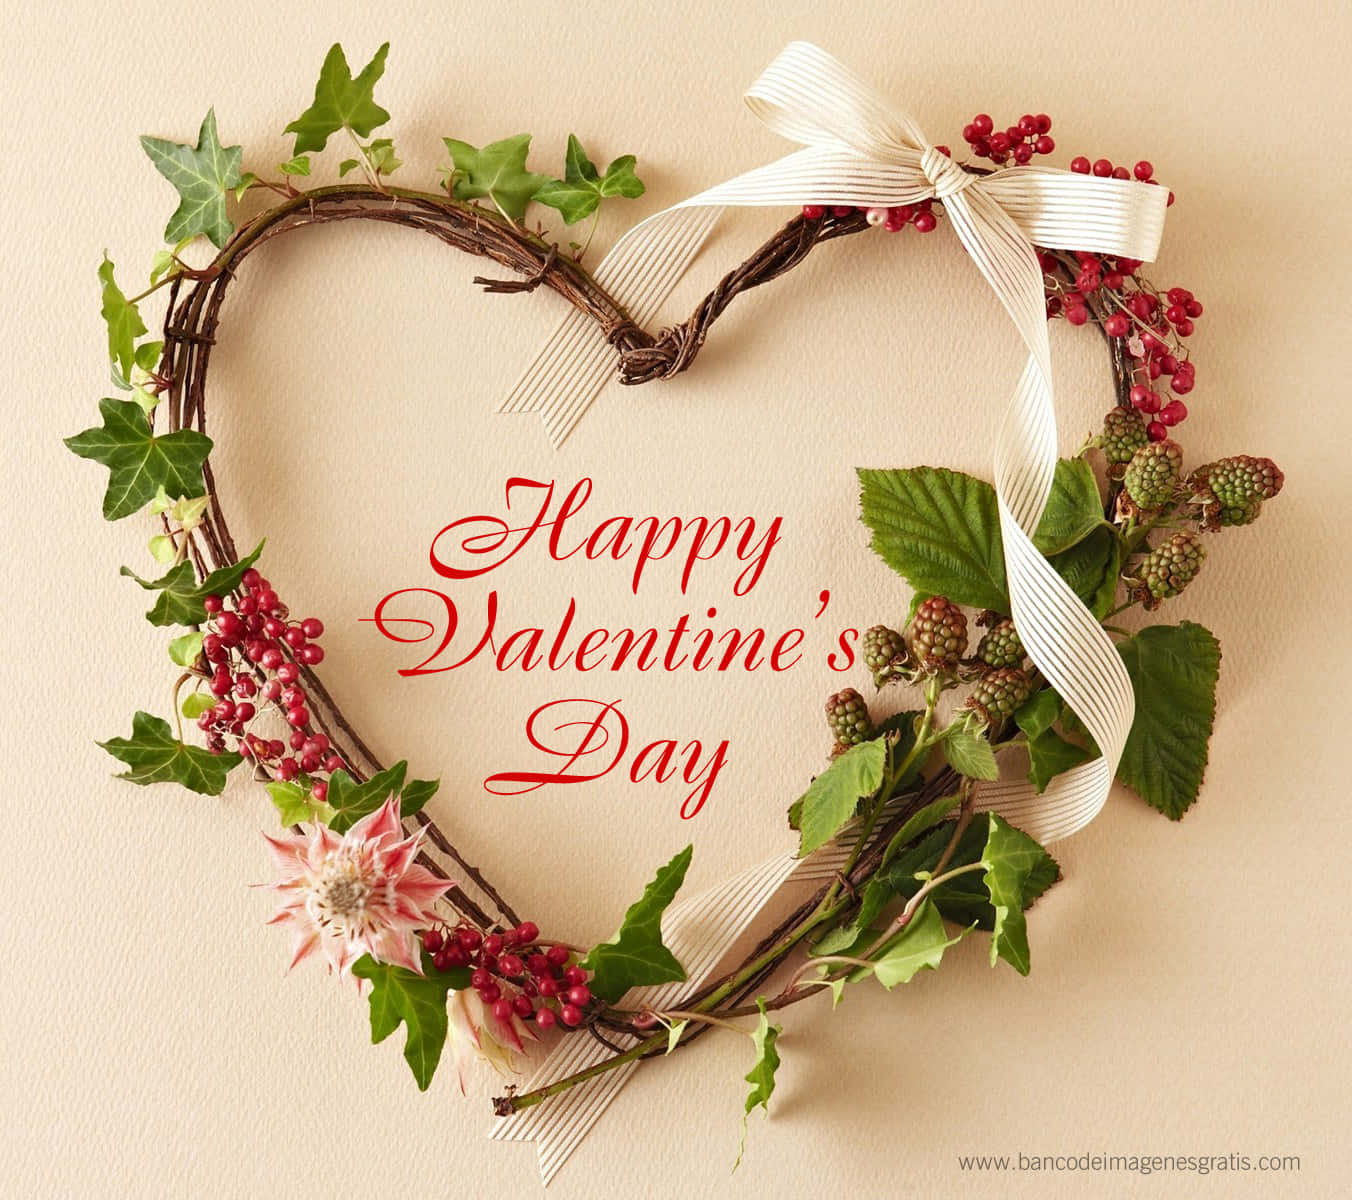 Valentine's Day Images For Facebook